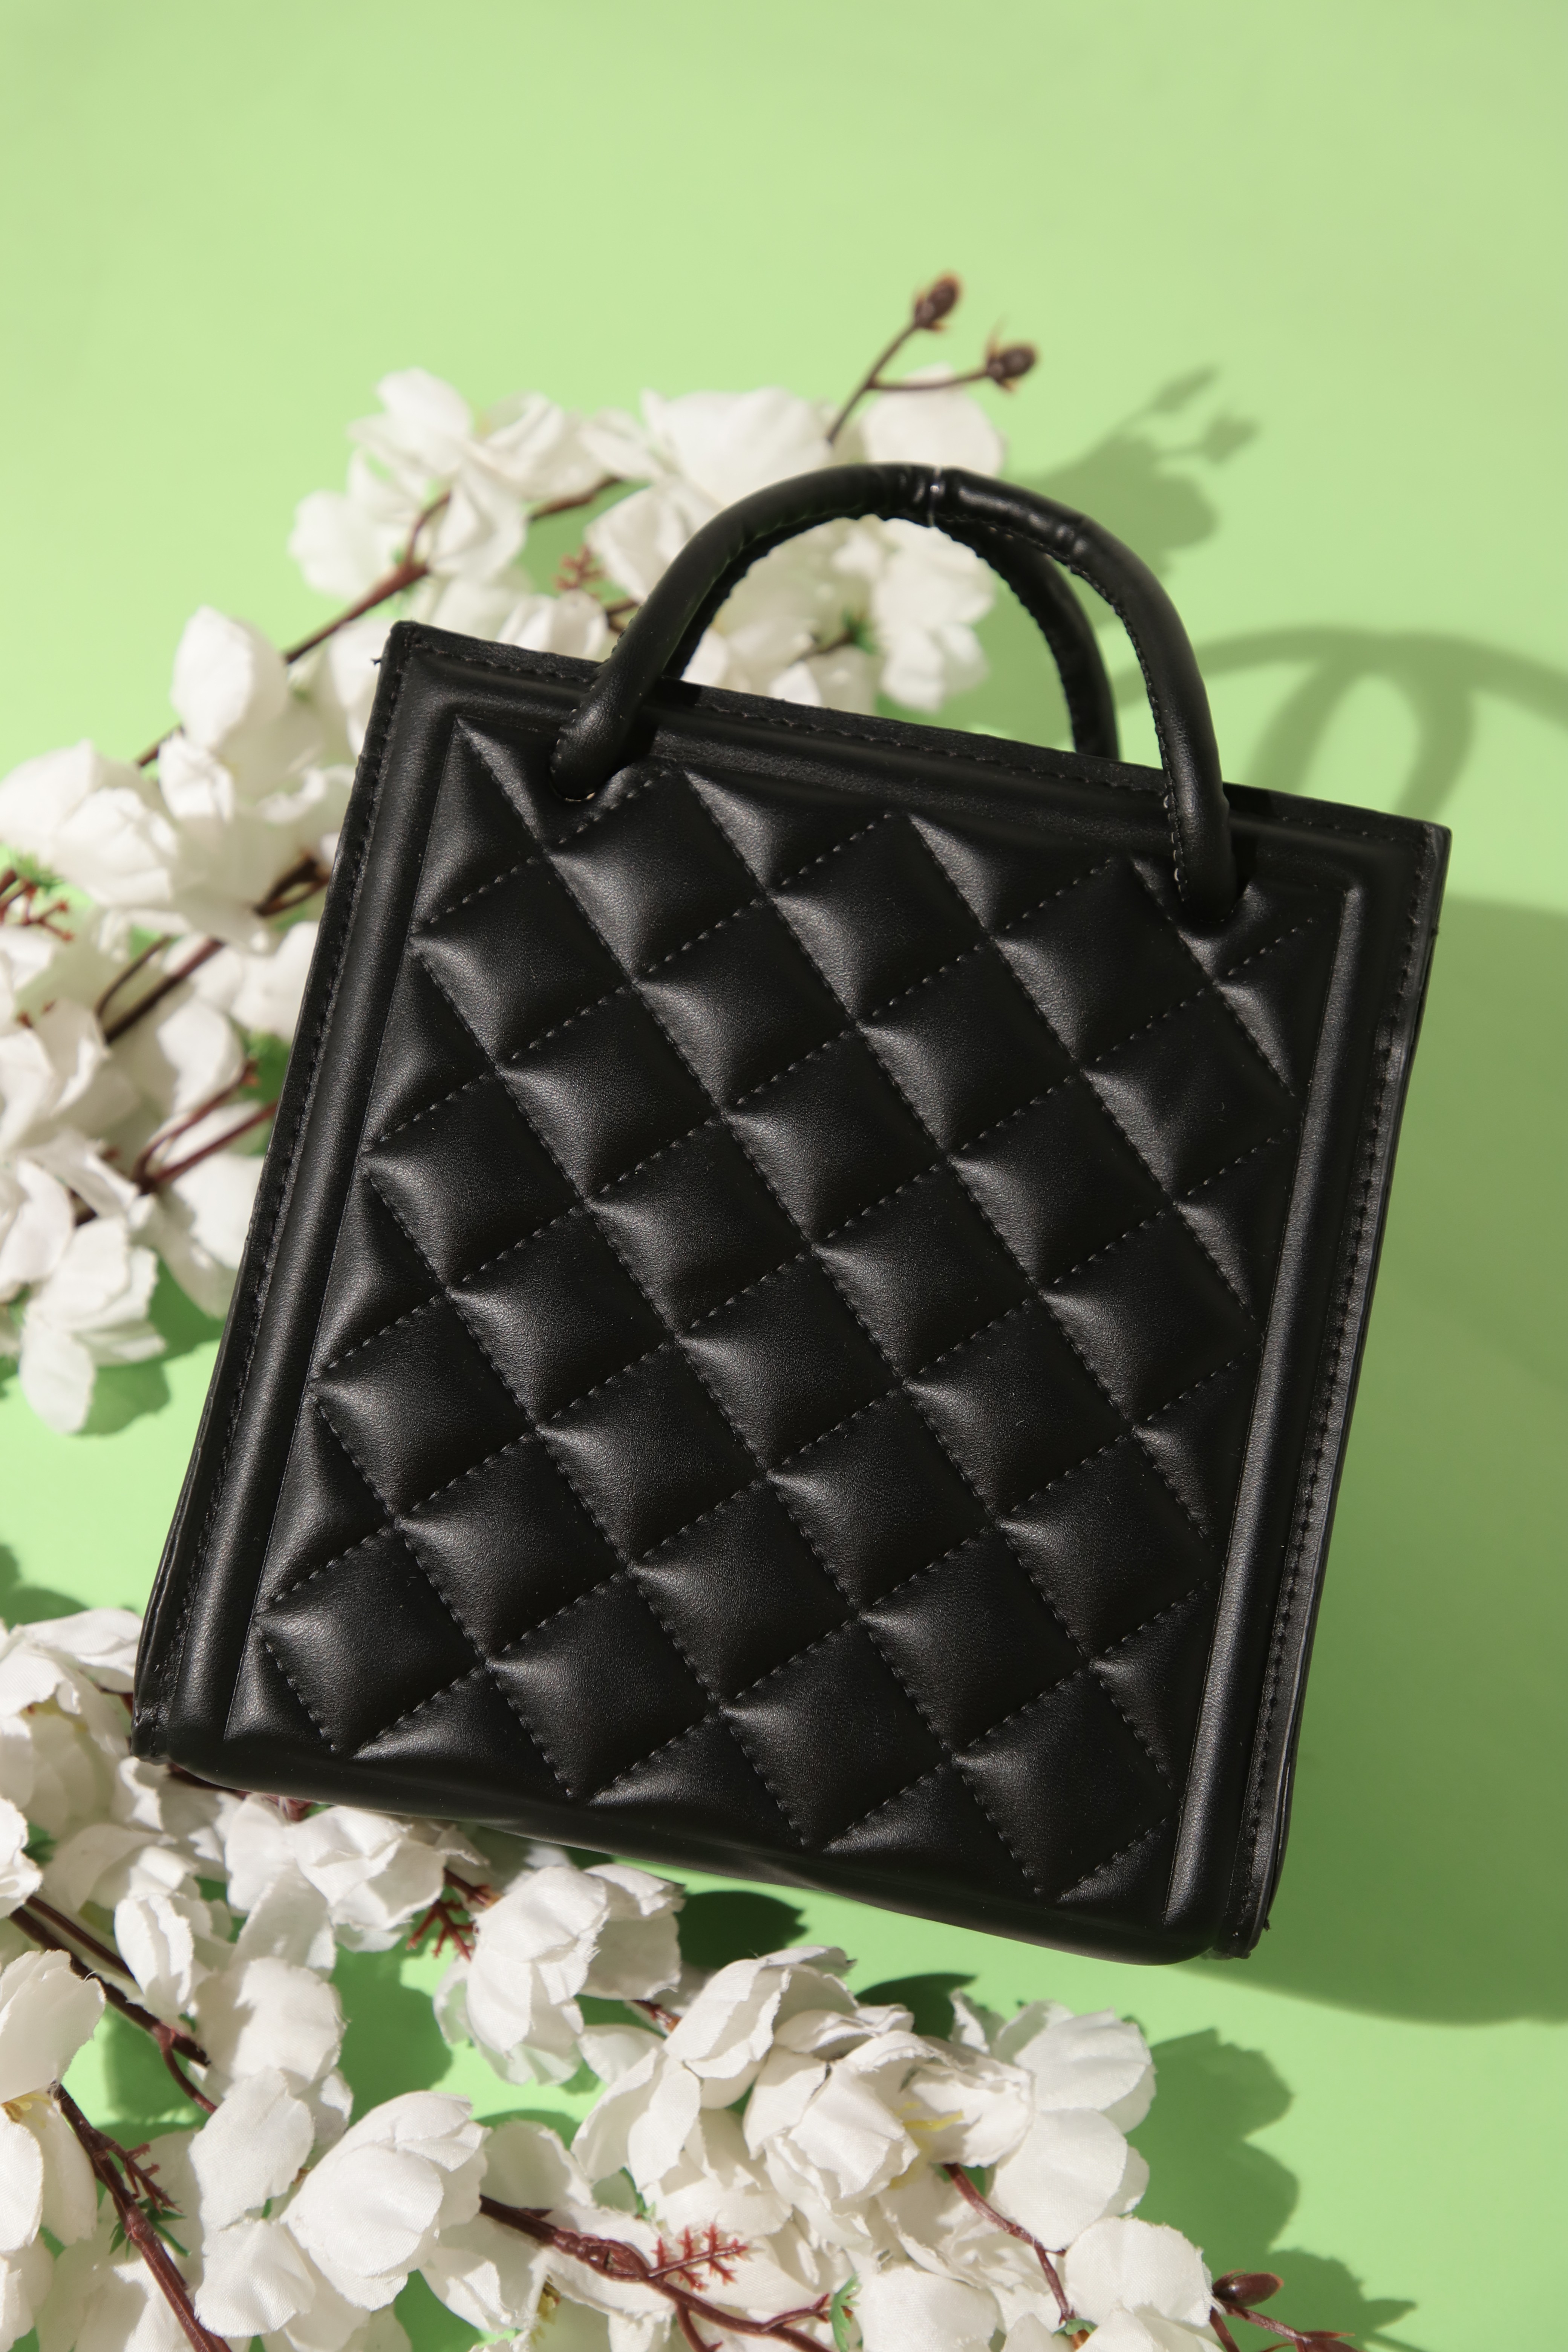 LC WAIKIKI Black Leather Look Quilted Womens Crossbody Bag with Detachable Strap At Nykaa Fashion - Your Online Shopping Store